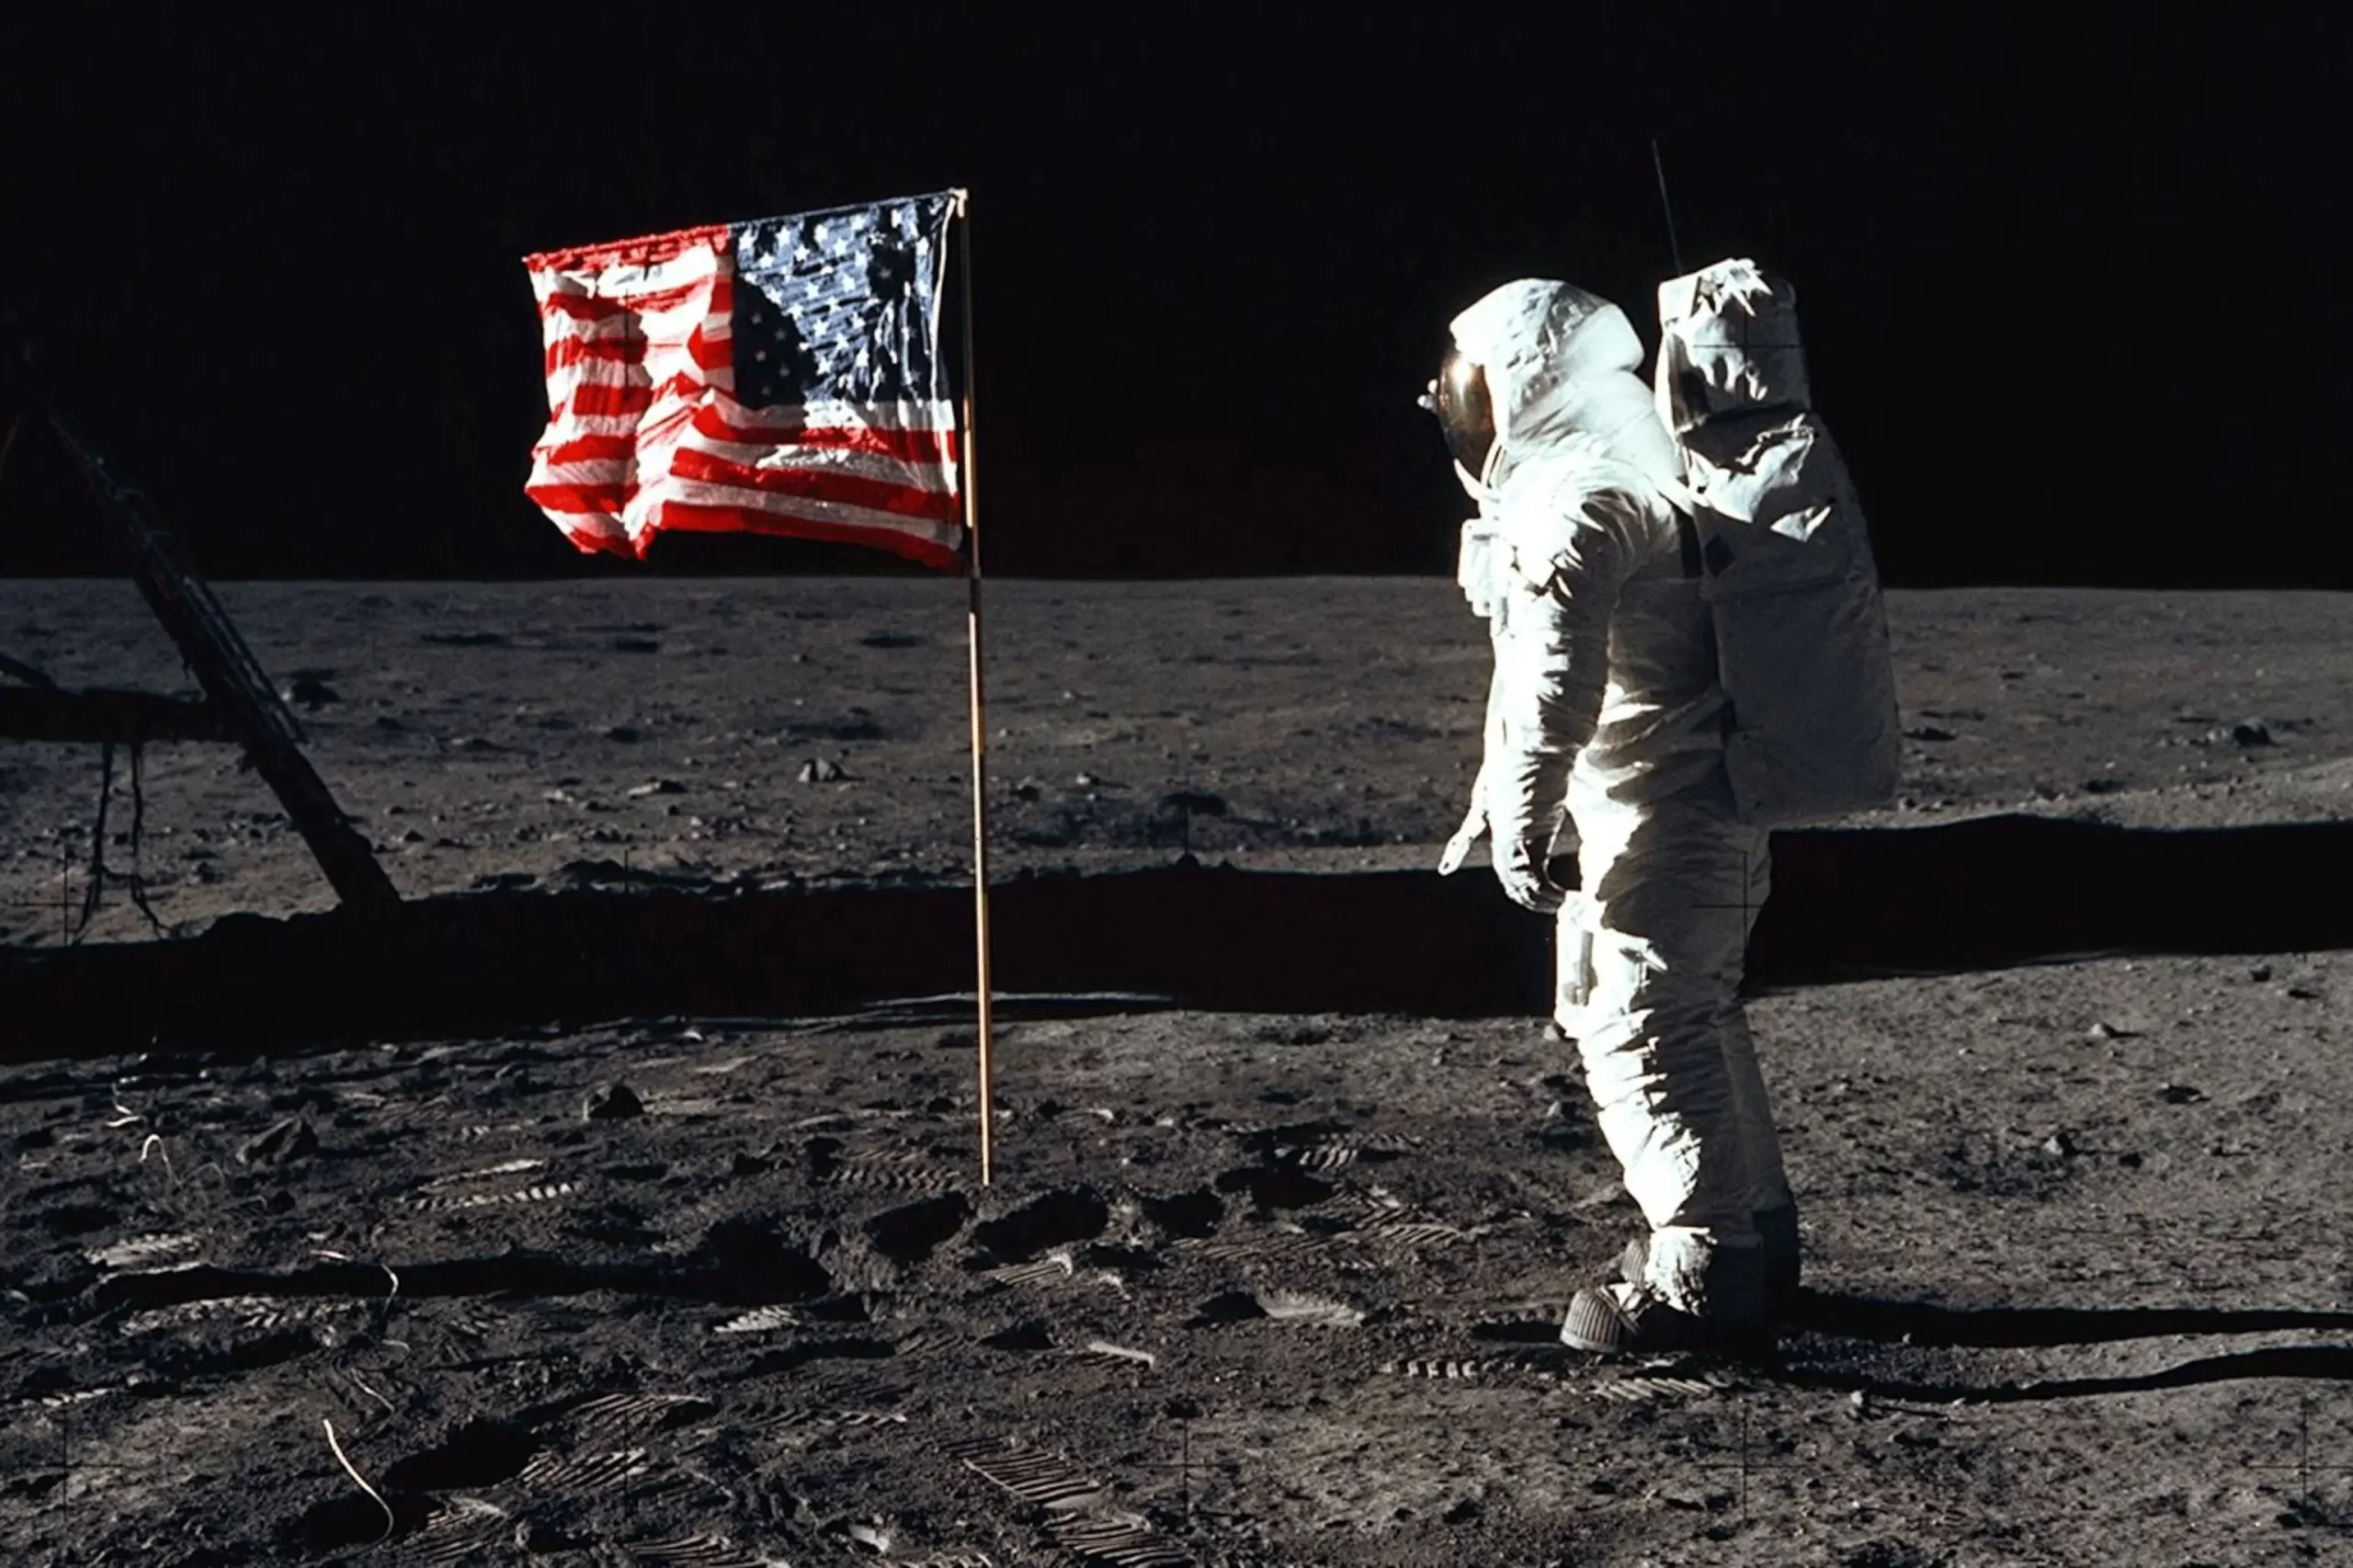 Exploring the Apollo 11 Moon Landing: Buzz Aldrin stands beside the lunar module 'Eagle,' with the barren lunar landscape stretching behind him.